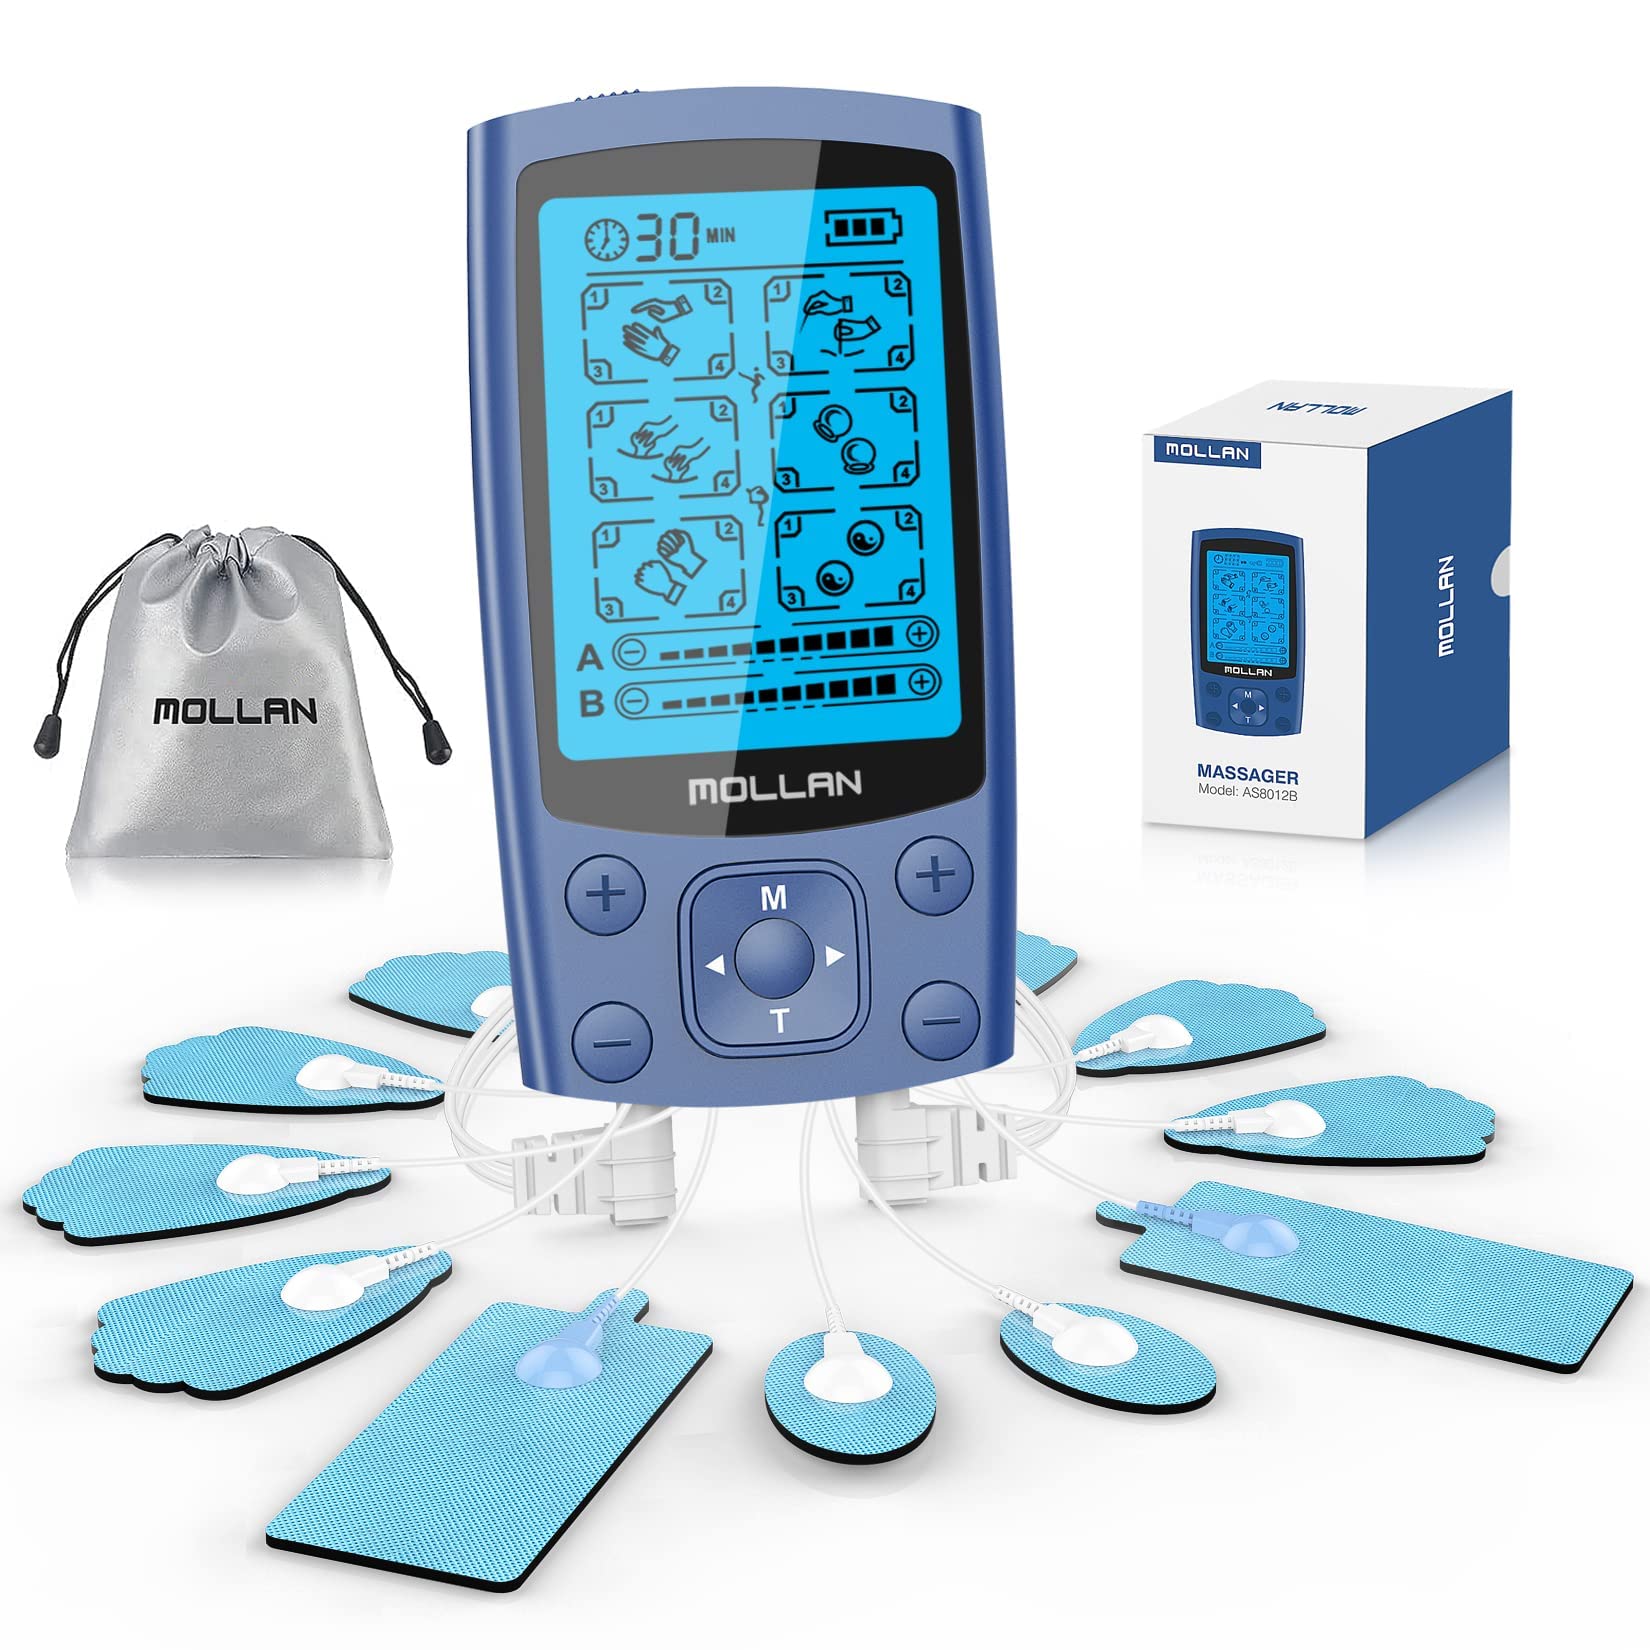 24 Mode Rechargeable TENS Unit Muscle Stimulator for Pain Relief and Muscle  Recovery